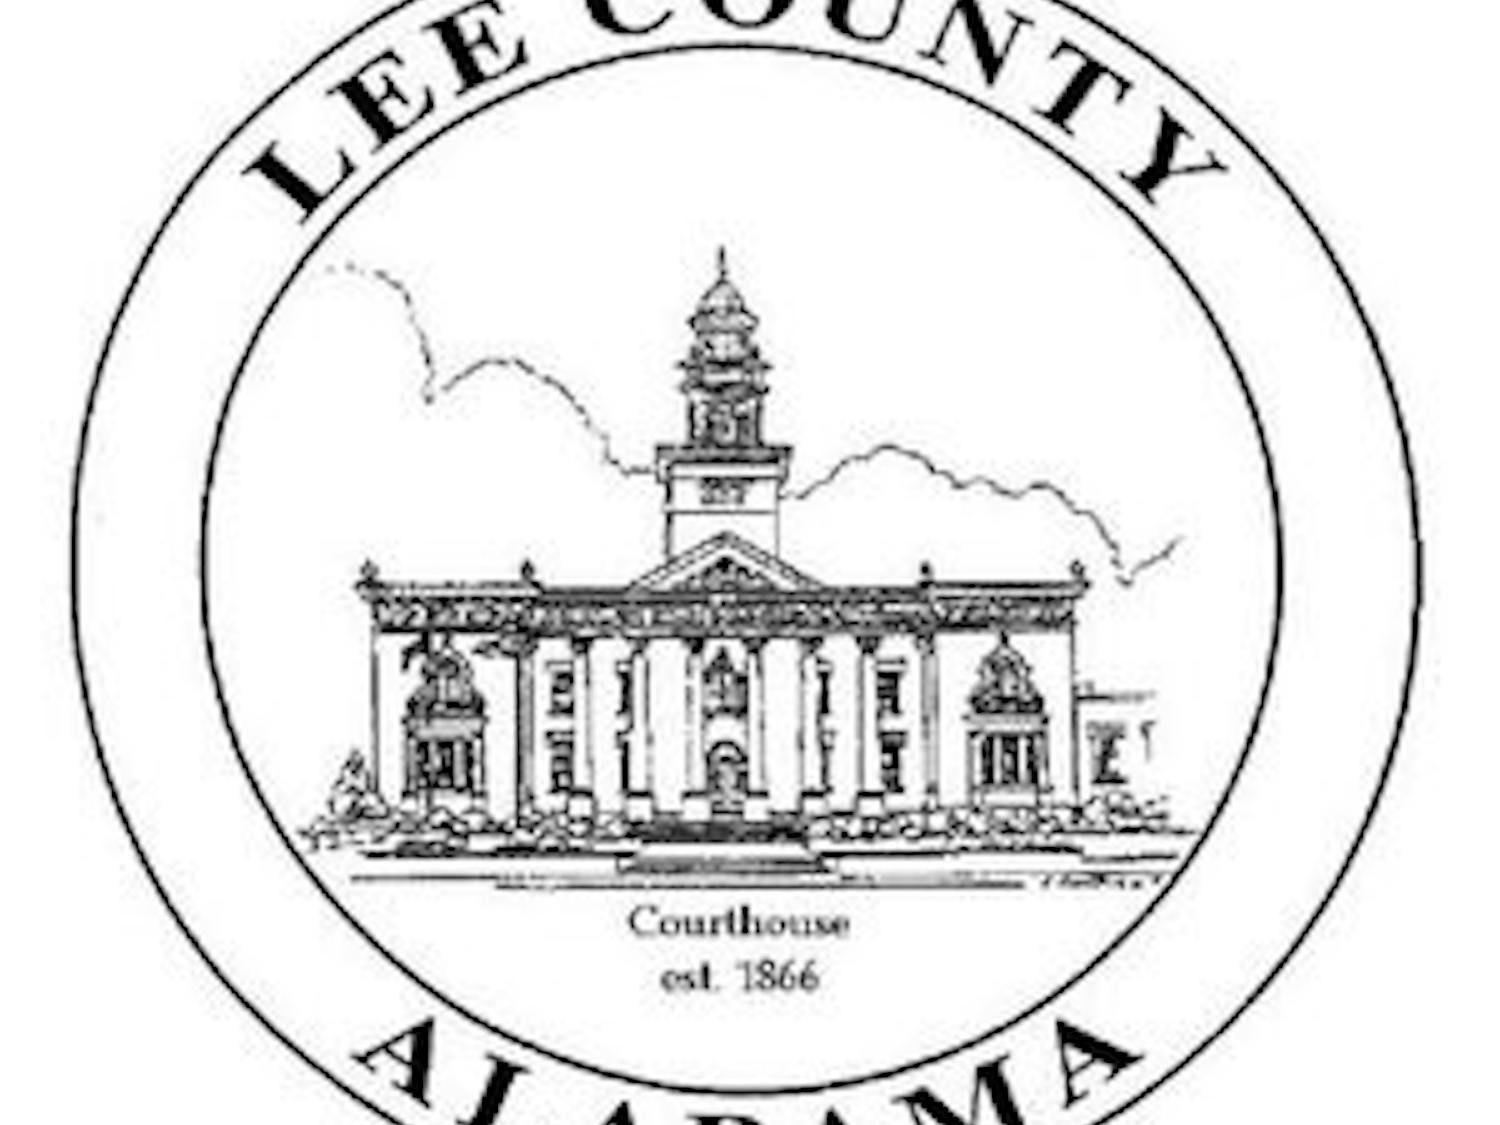 Lee County is one of 33 counties in Alabama that have been declared disaster areas because of a drought, which has reached the "severe to extreme" levels. (Courtesy of leeco.us)